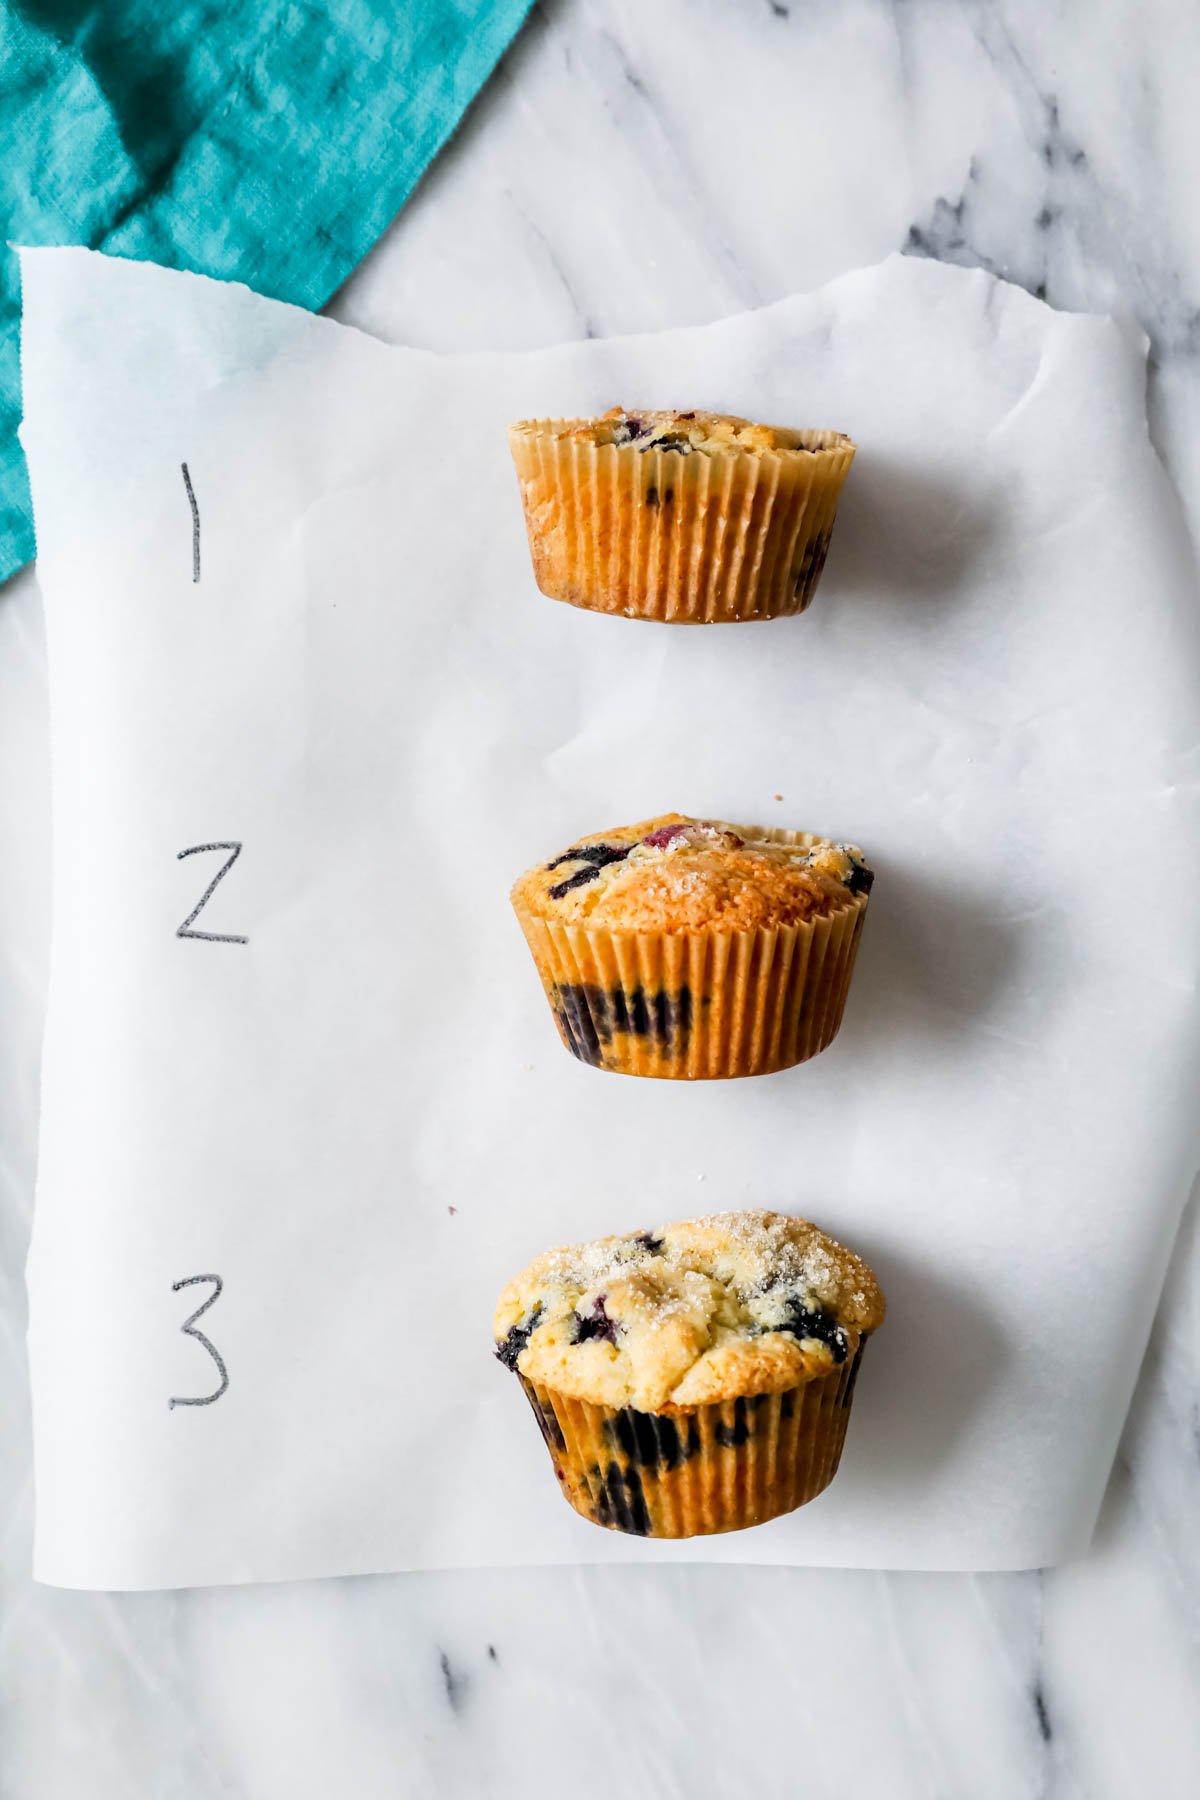 Overhead of 3 numbered muffins on their side, 1 is flat, 2 has a slightly rounded top, 3 is plump with a nice muffin top